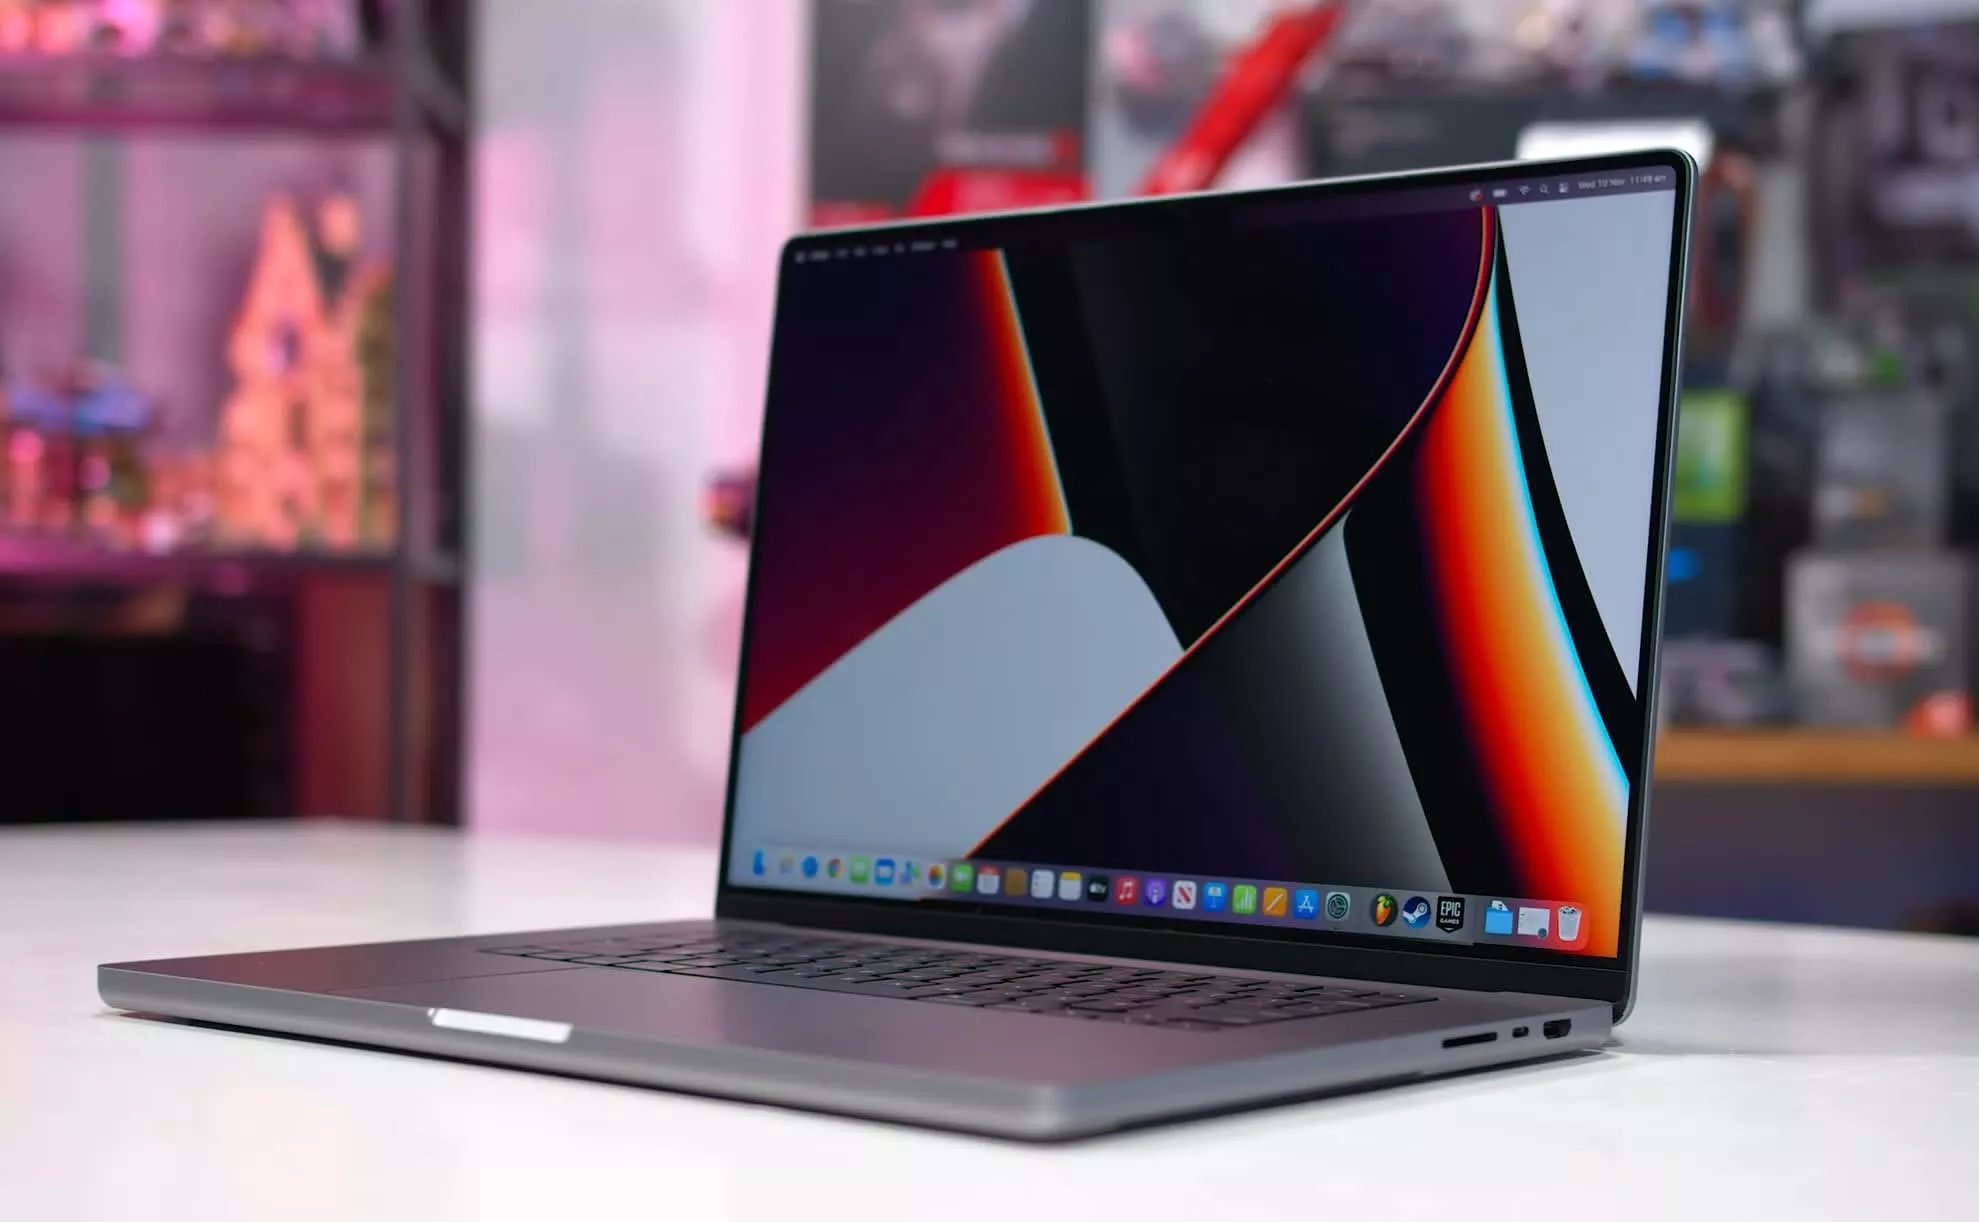 ProMotion On The MacBook Pro: Is It Really A Big Deal?